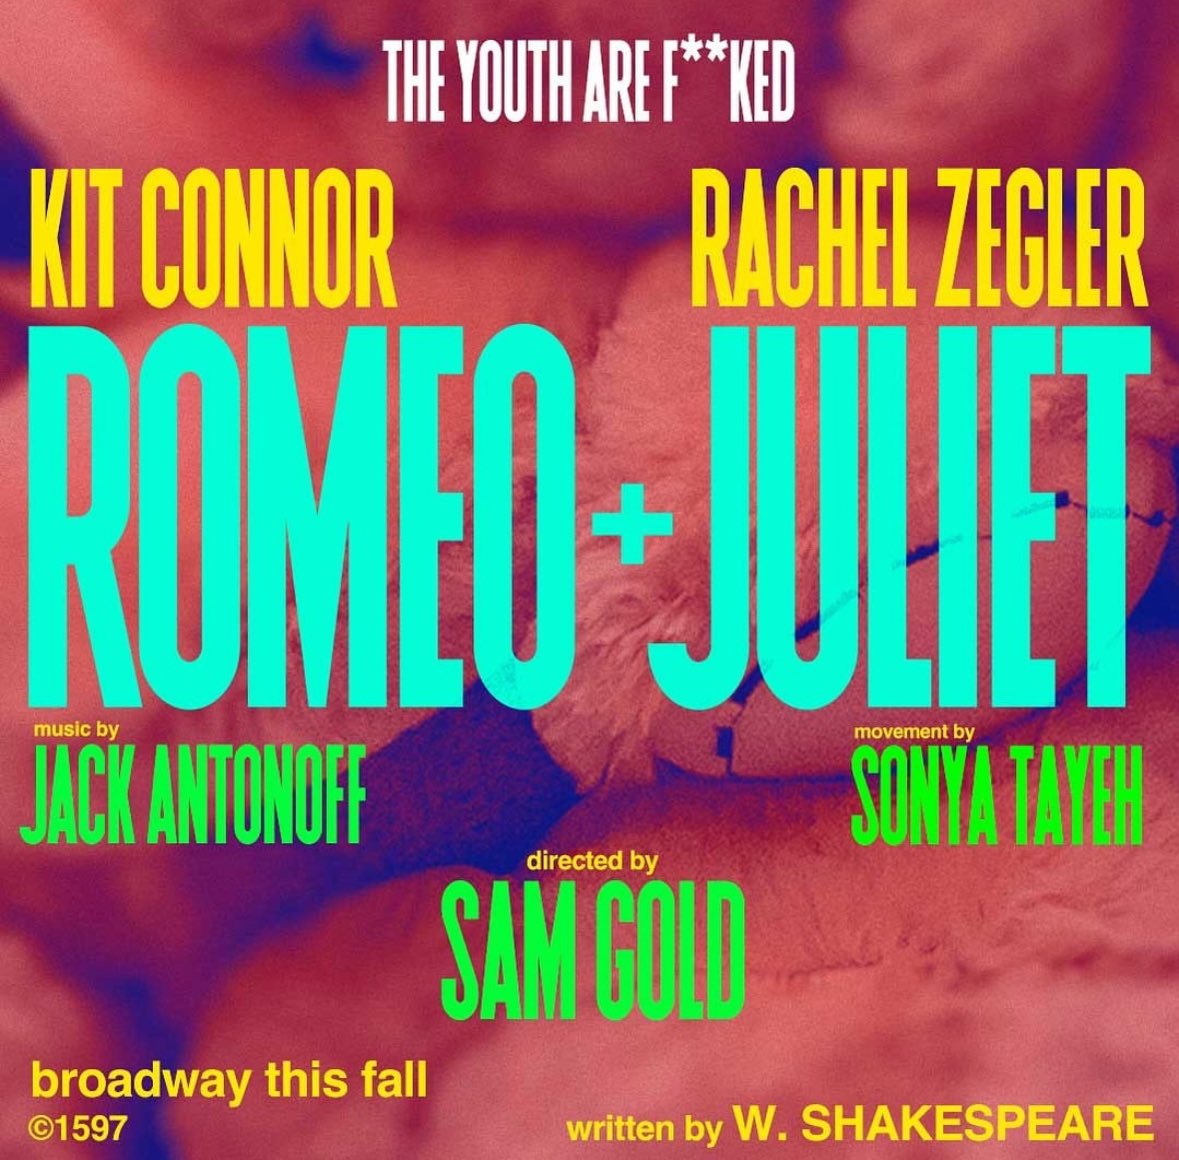 Kit Connor and Rachel Zegler for Sam Gold’s upcoming Broadway staging of ‘ROMEO & JULIET.’ Coming to Broadway this fall.